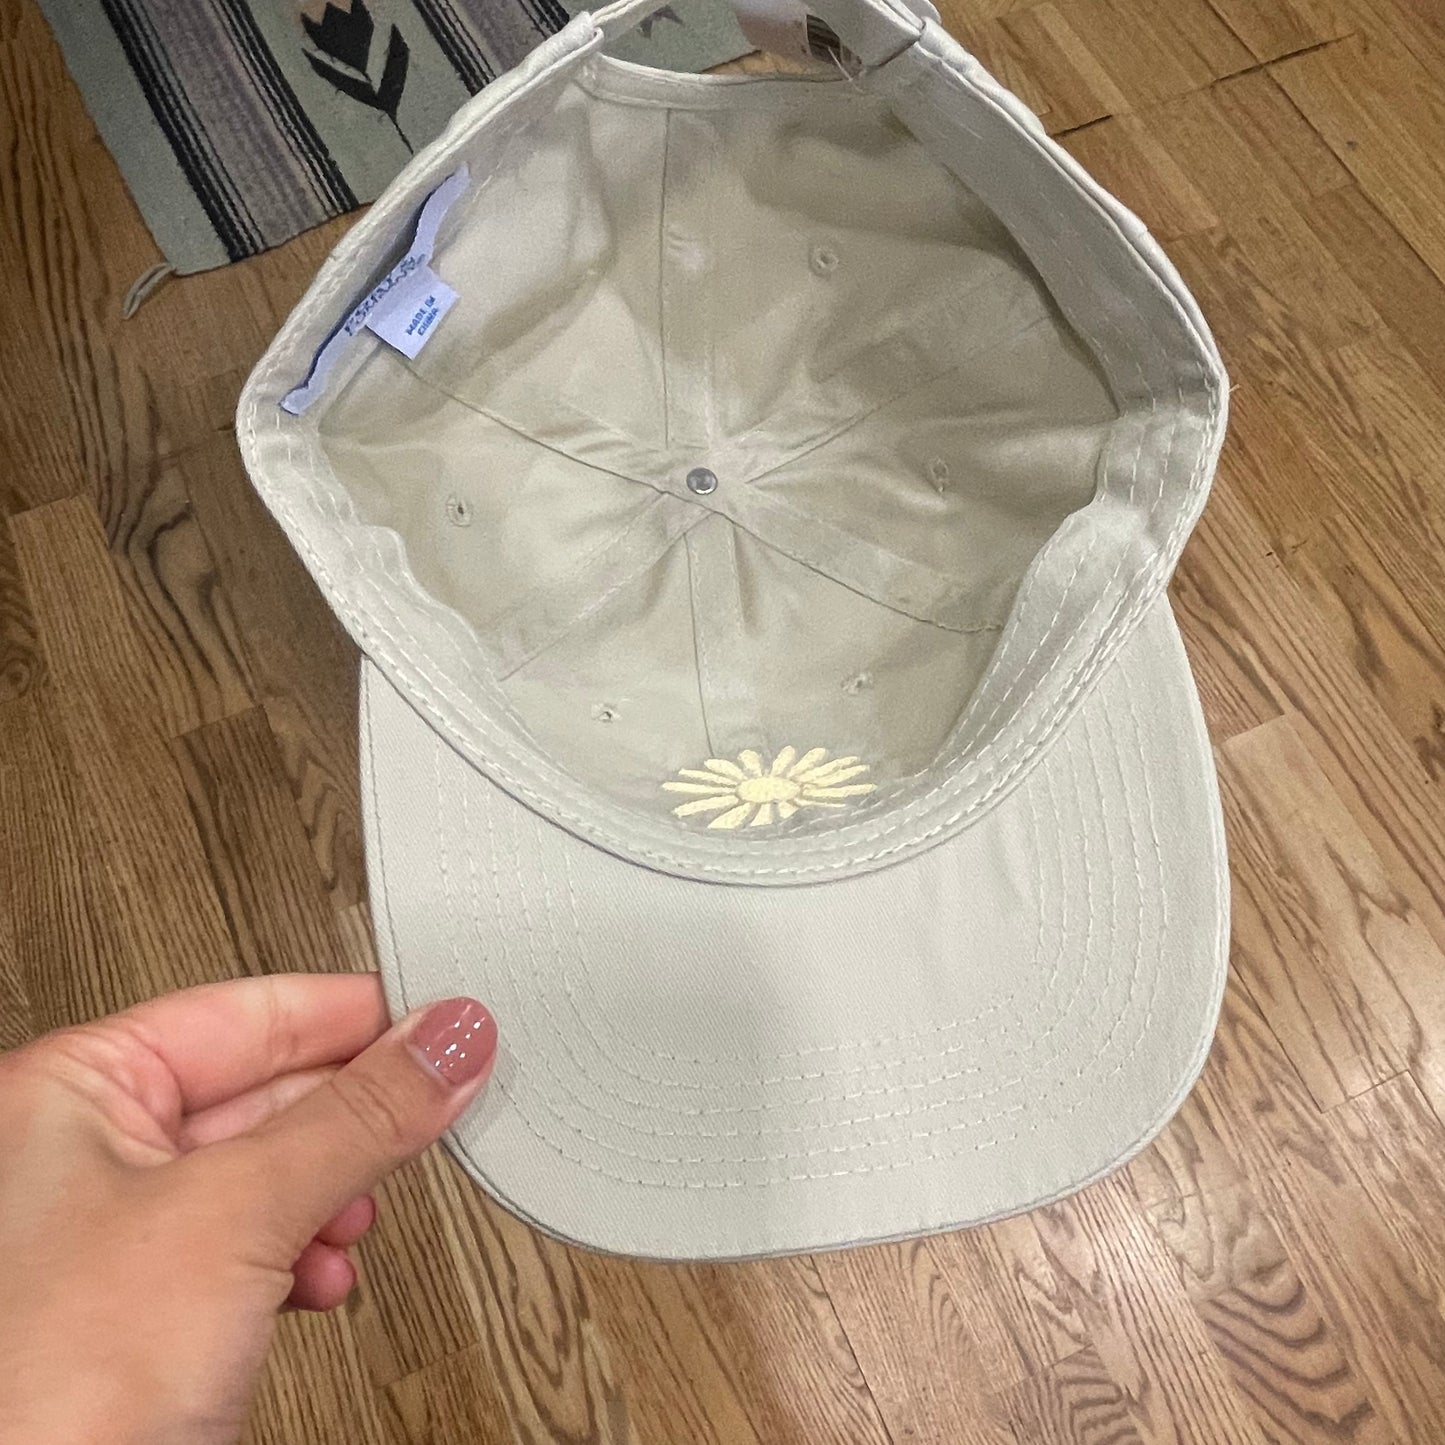 Daisy Embroidered Baseball Hat